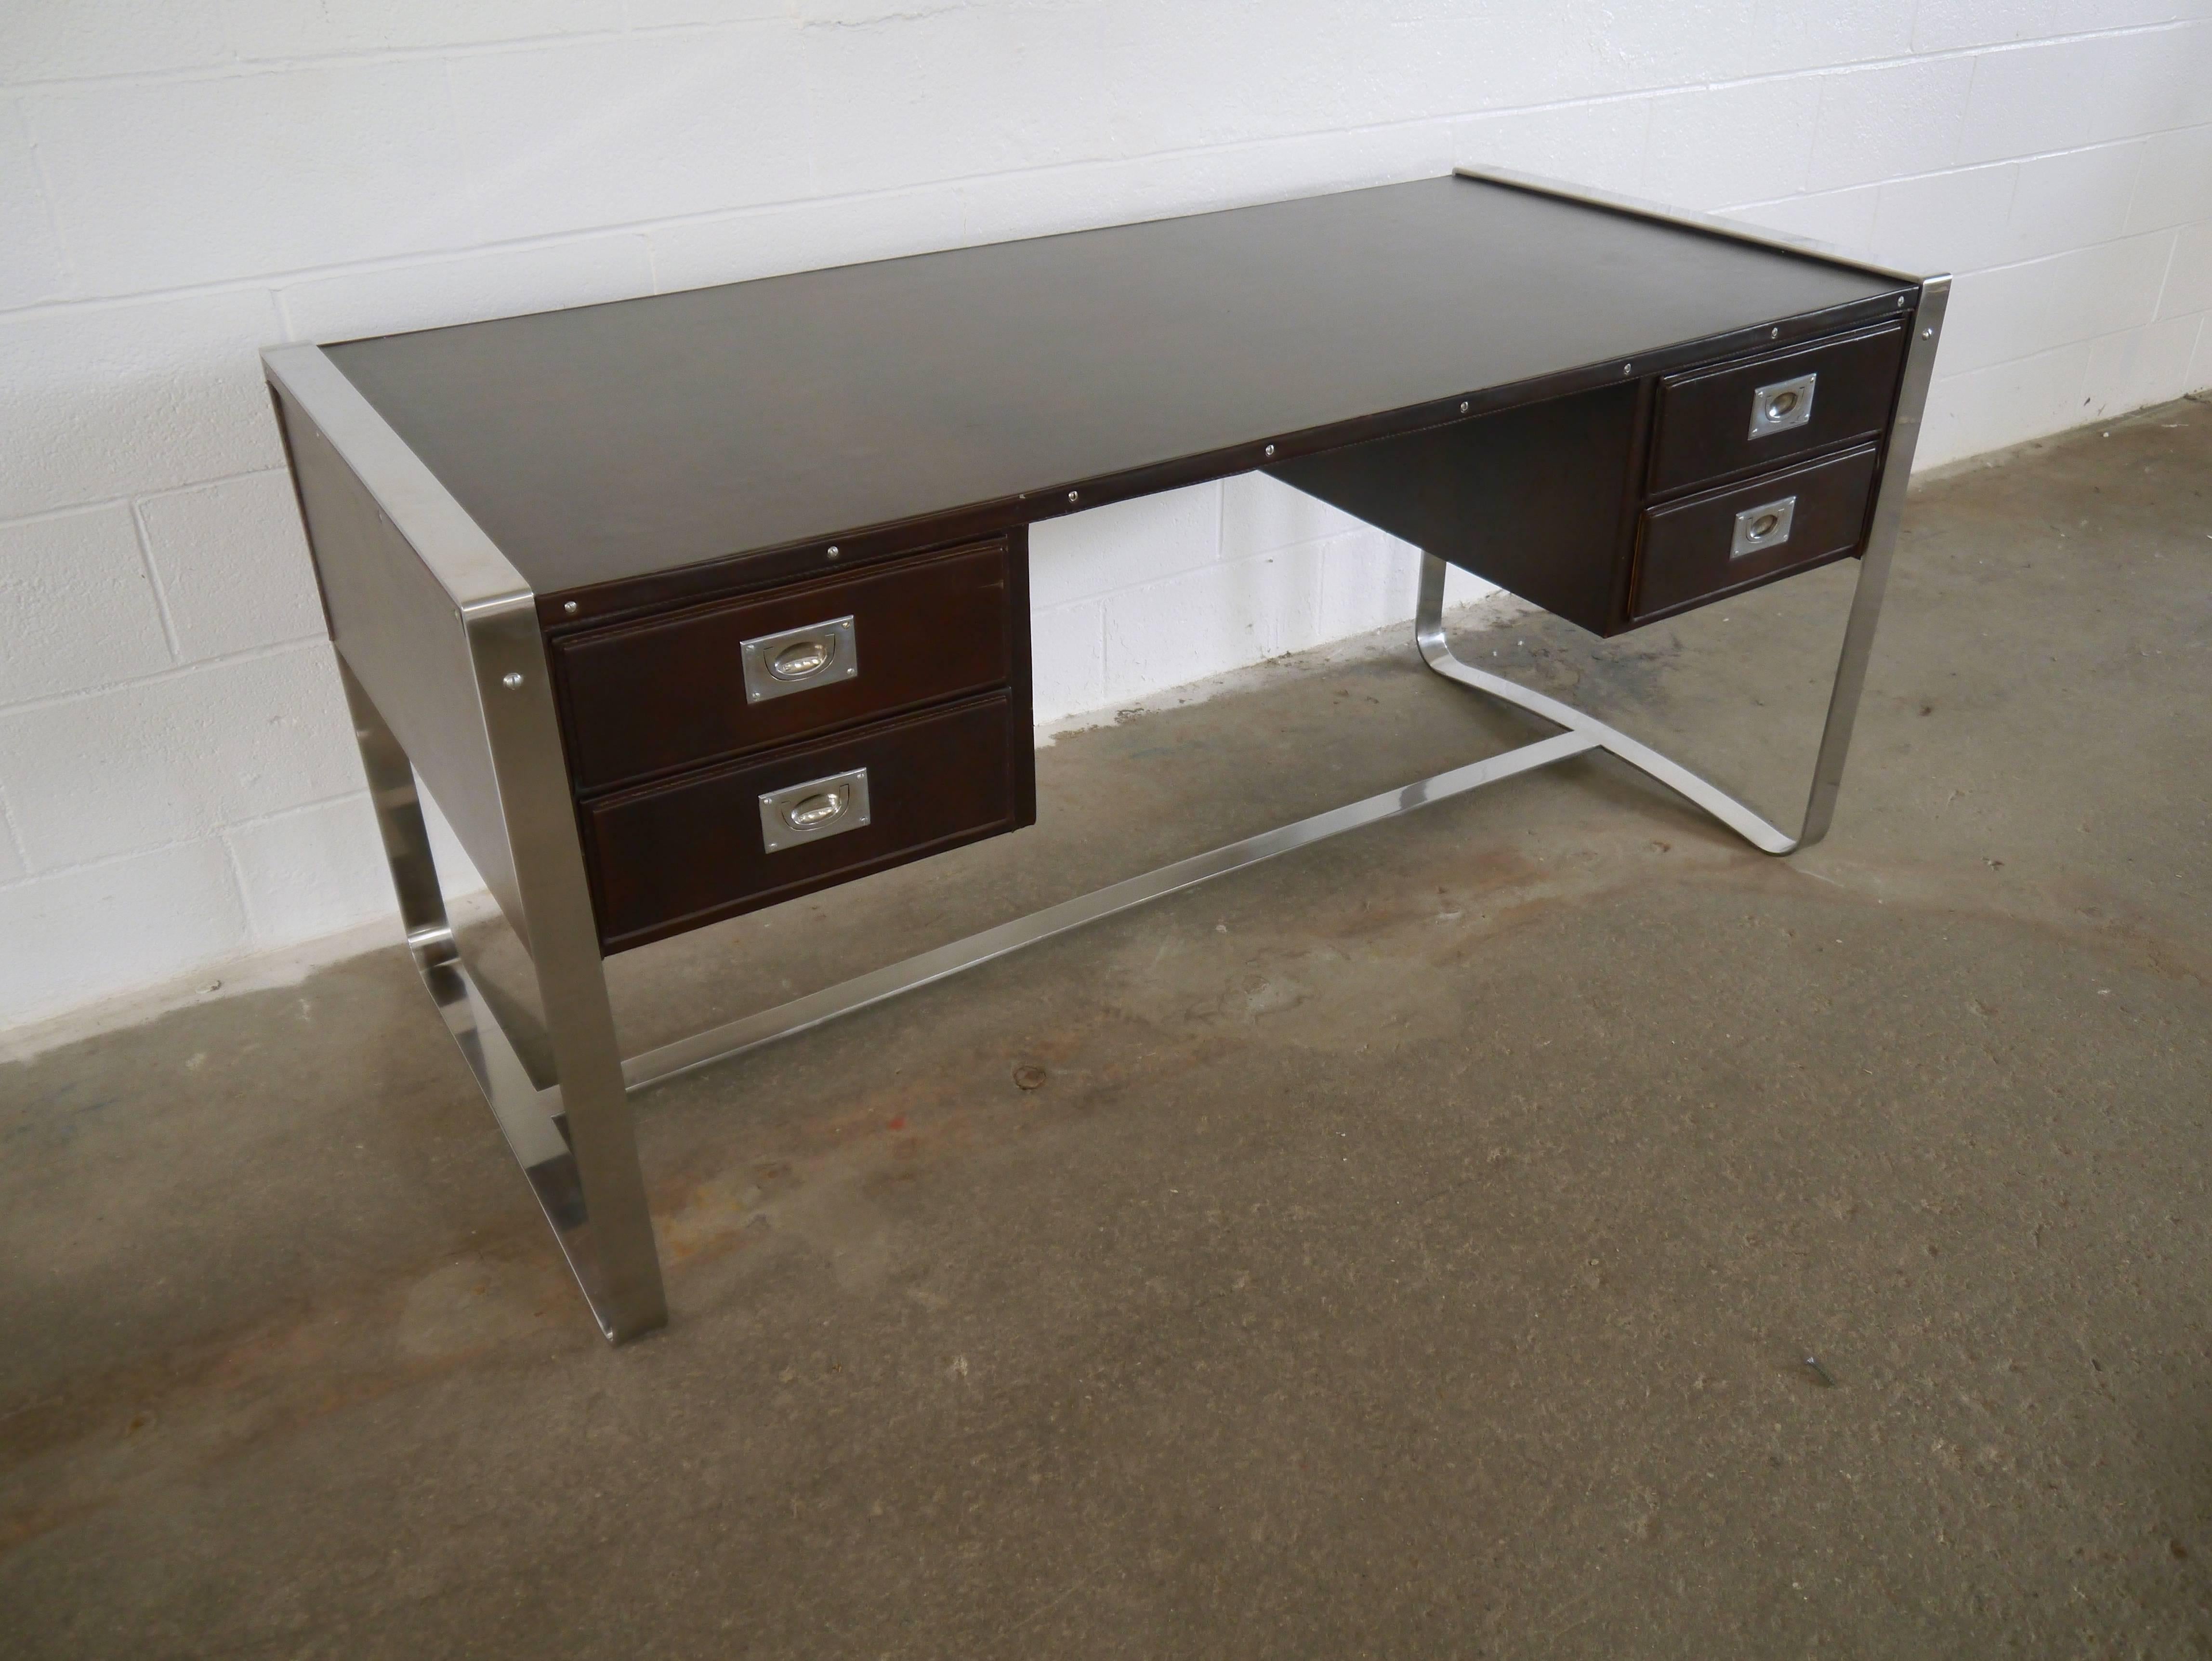 Desk by Jacques Adnet. Having a stainless steel frame, stitched leather, four drawers and handmade nickel-plated hardware.